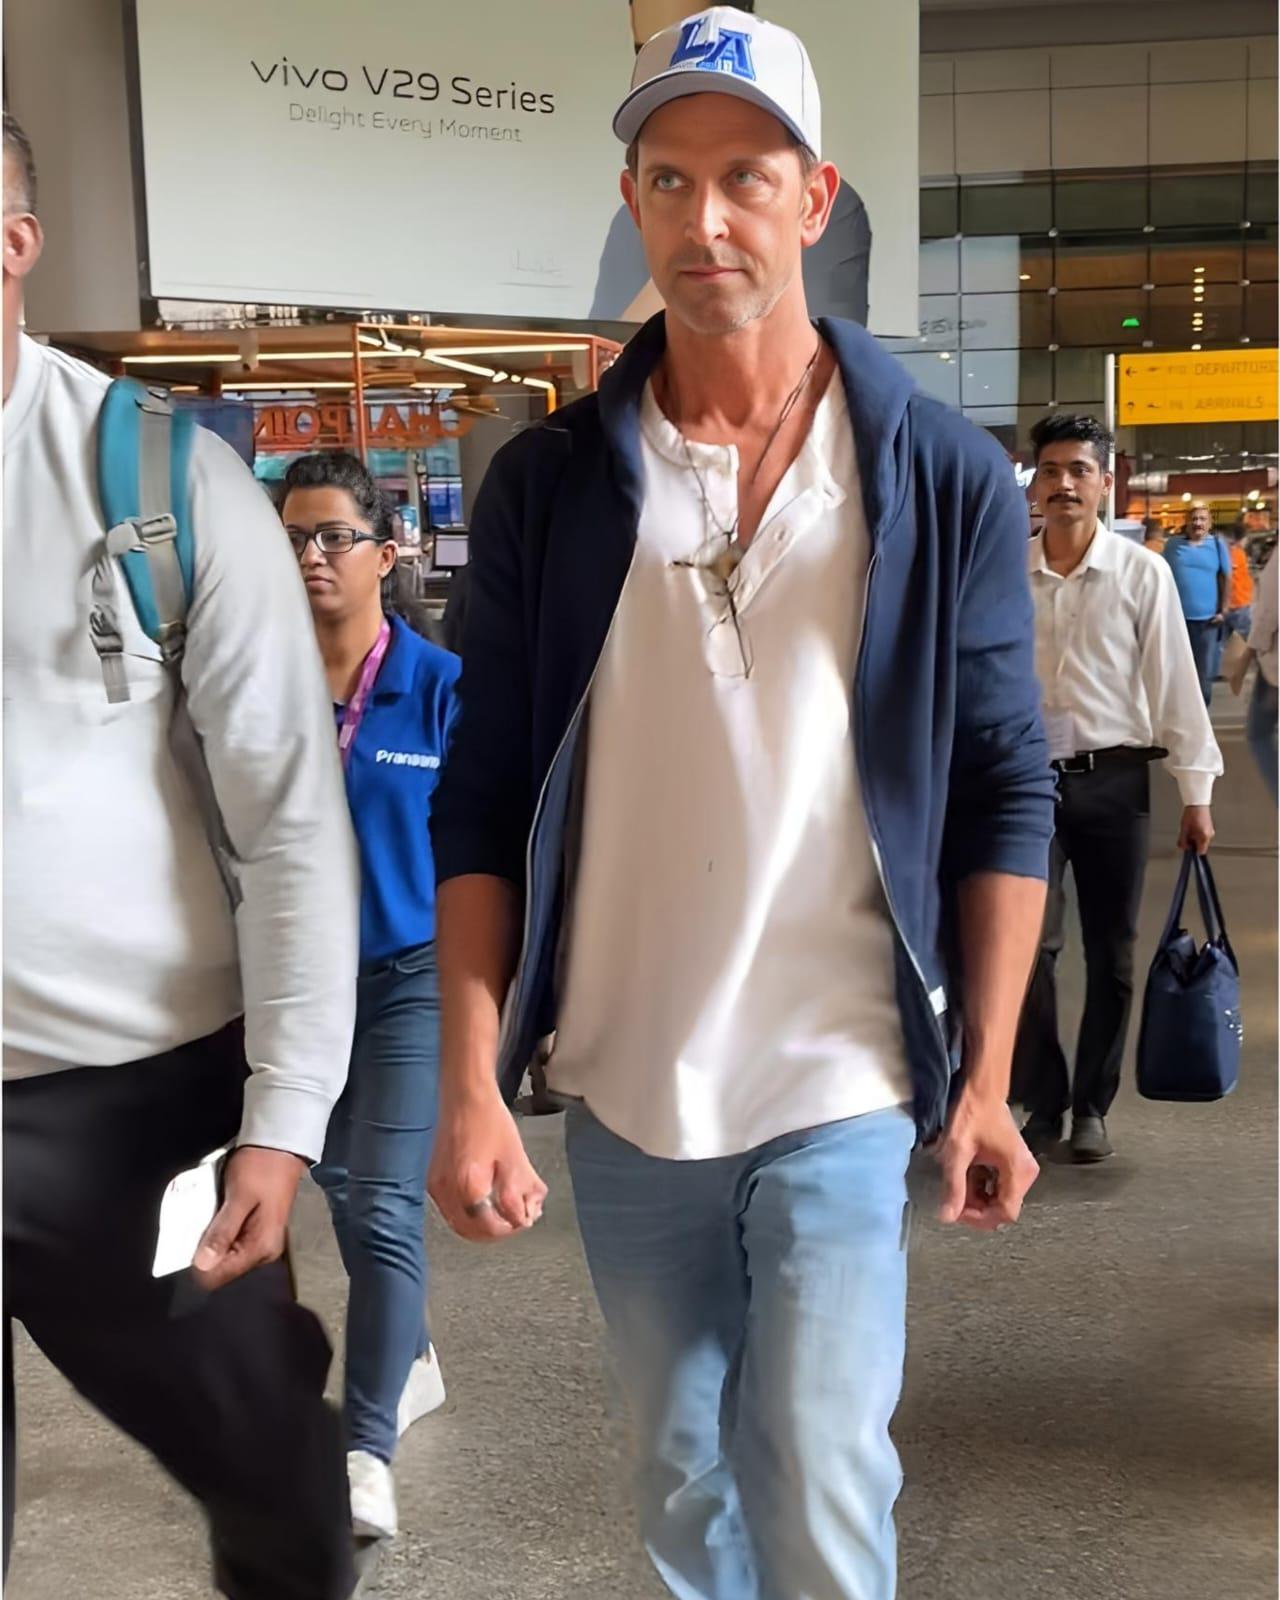 Hrithik Roshan was seen at the Mumbai airport post wrapping up some shoots related to his upcoming film 'Fighter'